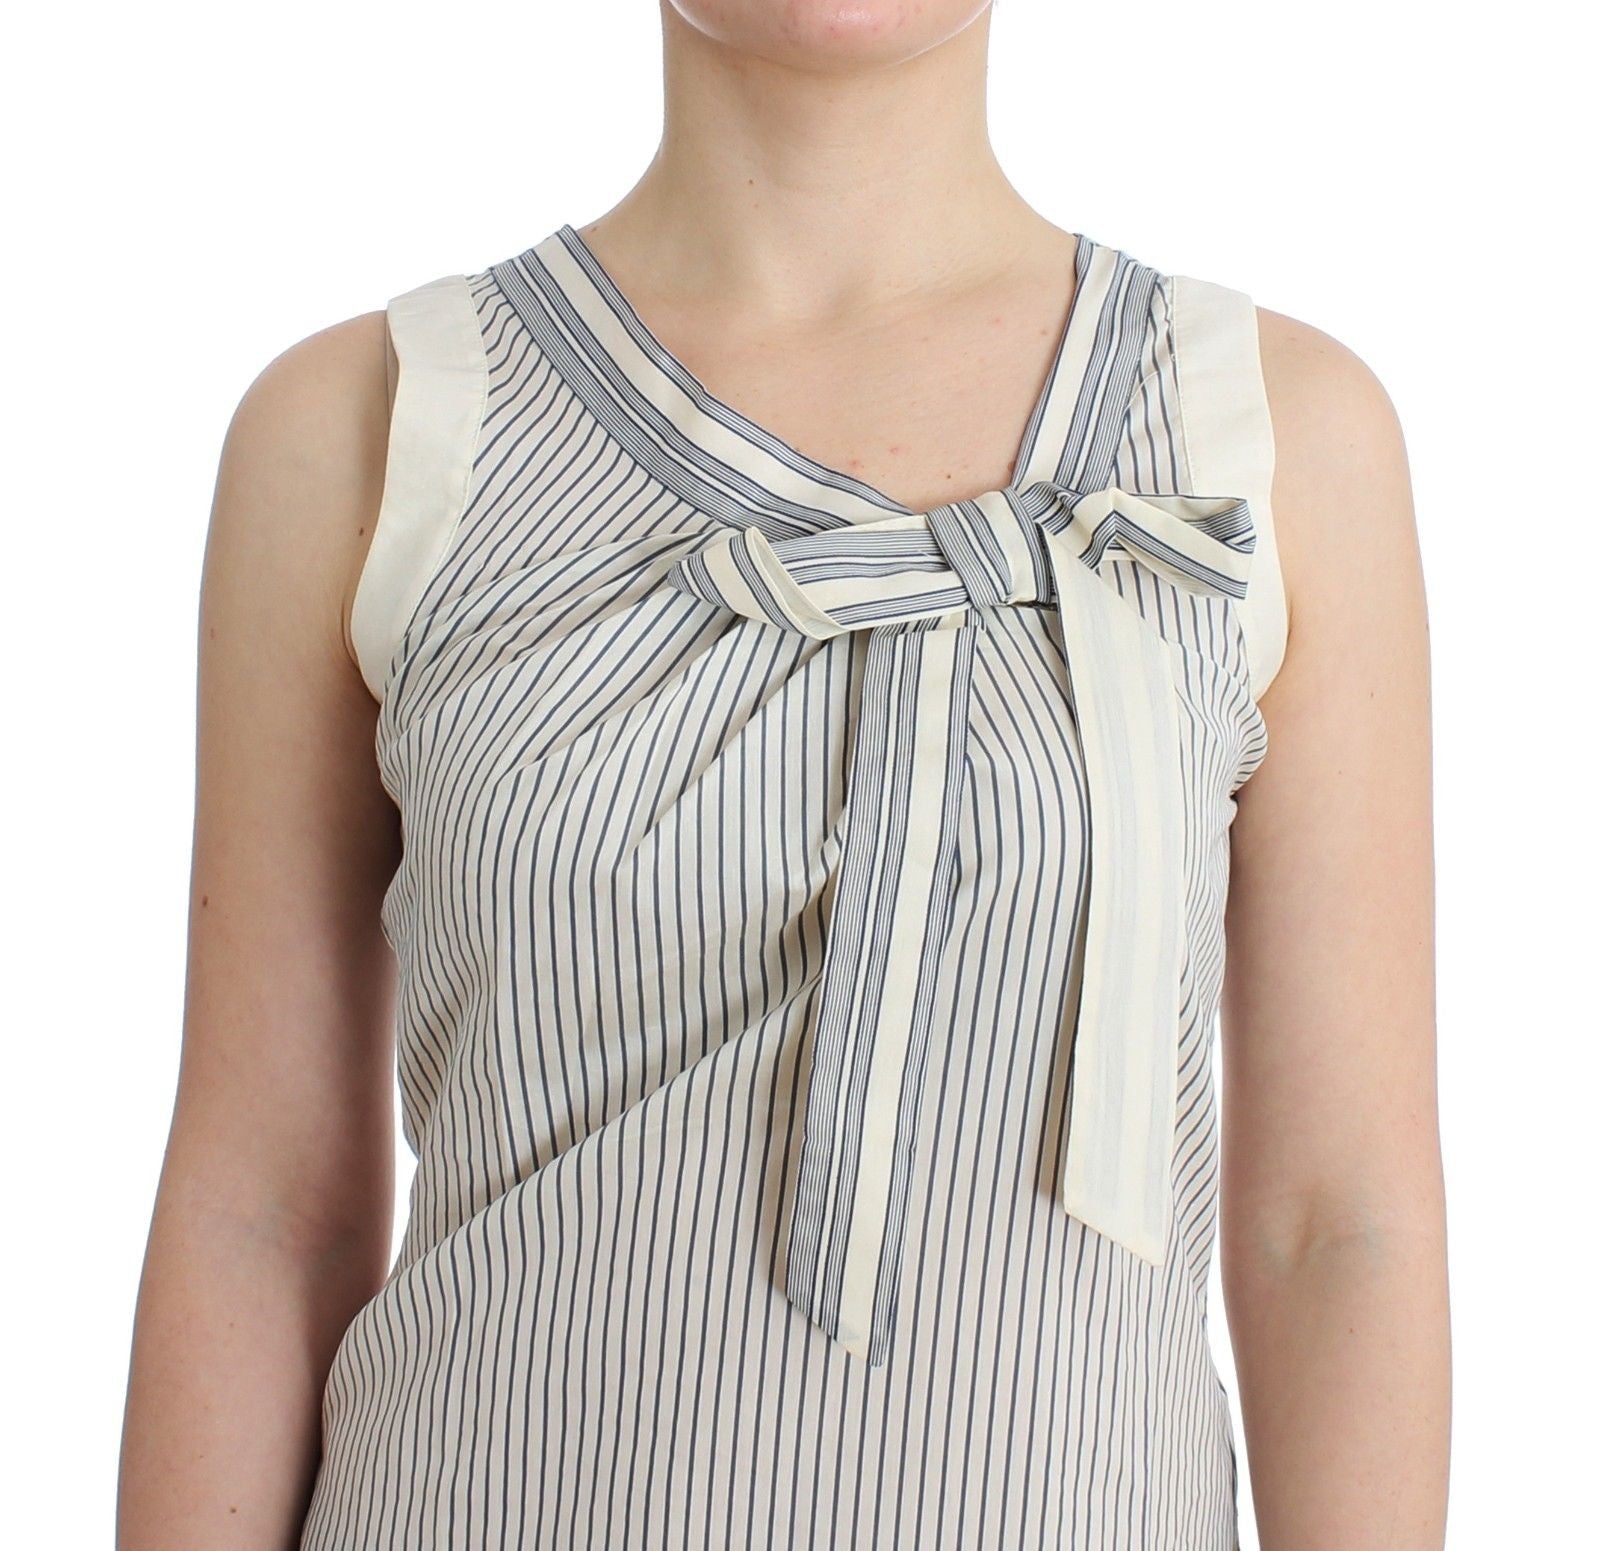 Buy Beachwear Striped Top Blouse Shirt Bow Tank by Ermanno Scervino